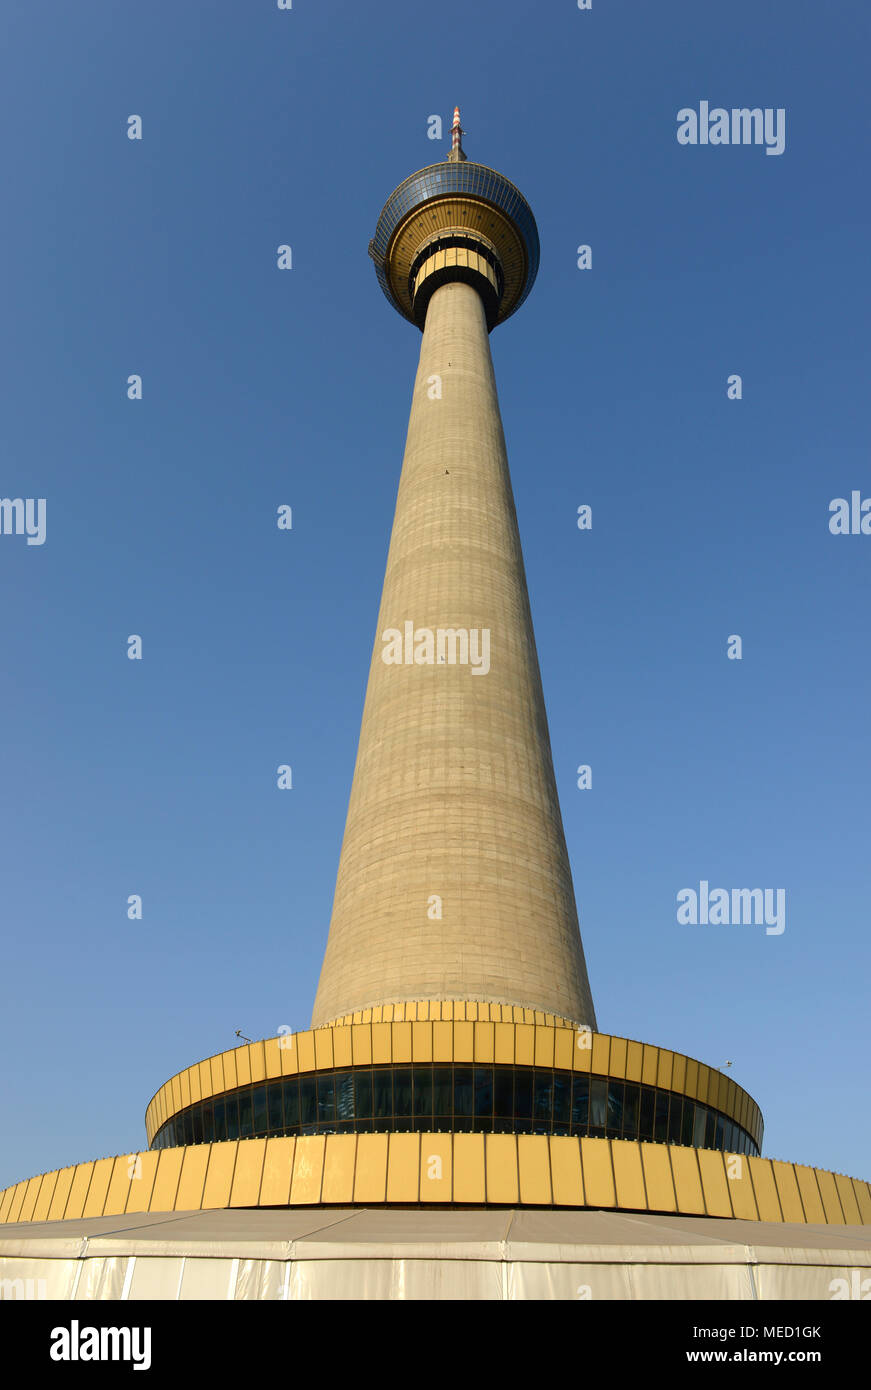 China Central Television tower in Beijing, China, seen from the base - the tower opened in 1994 Stock Photo